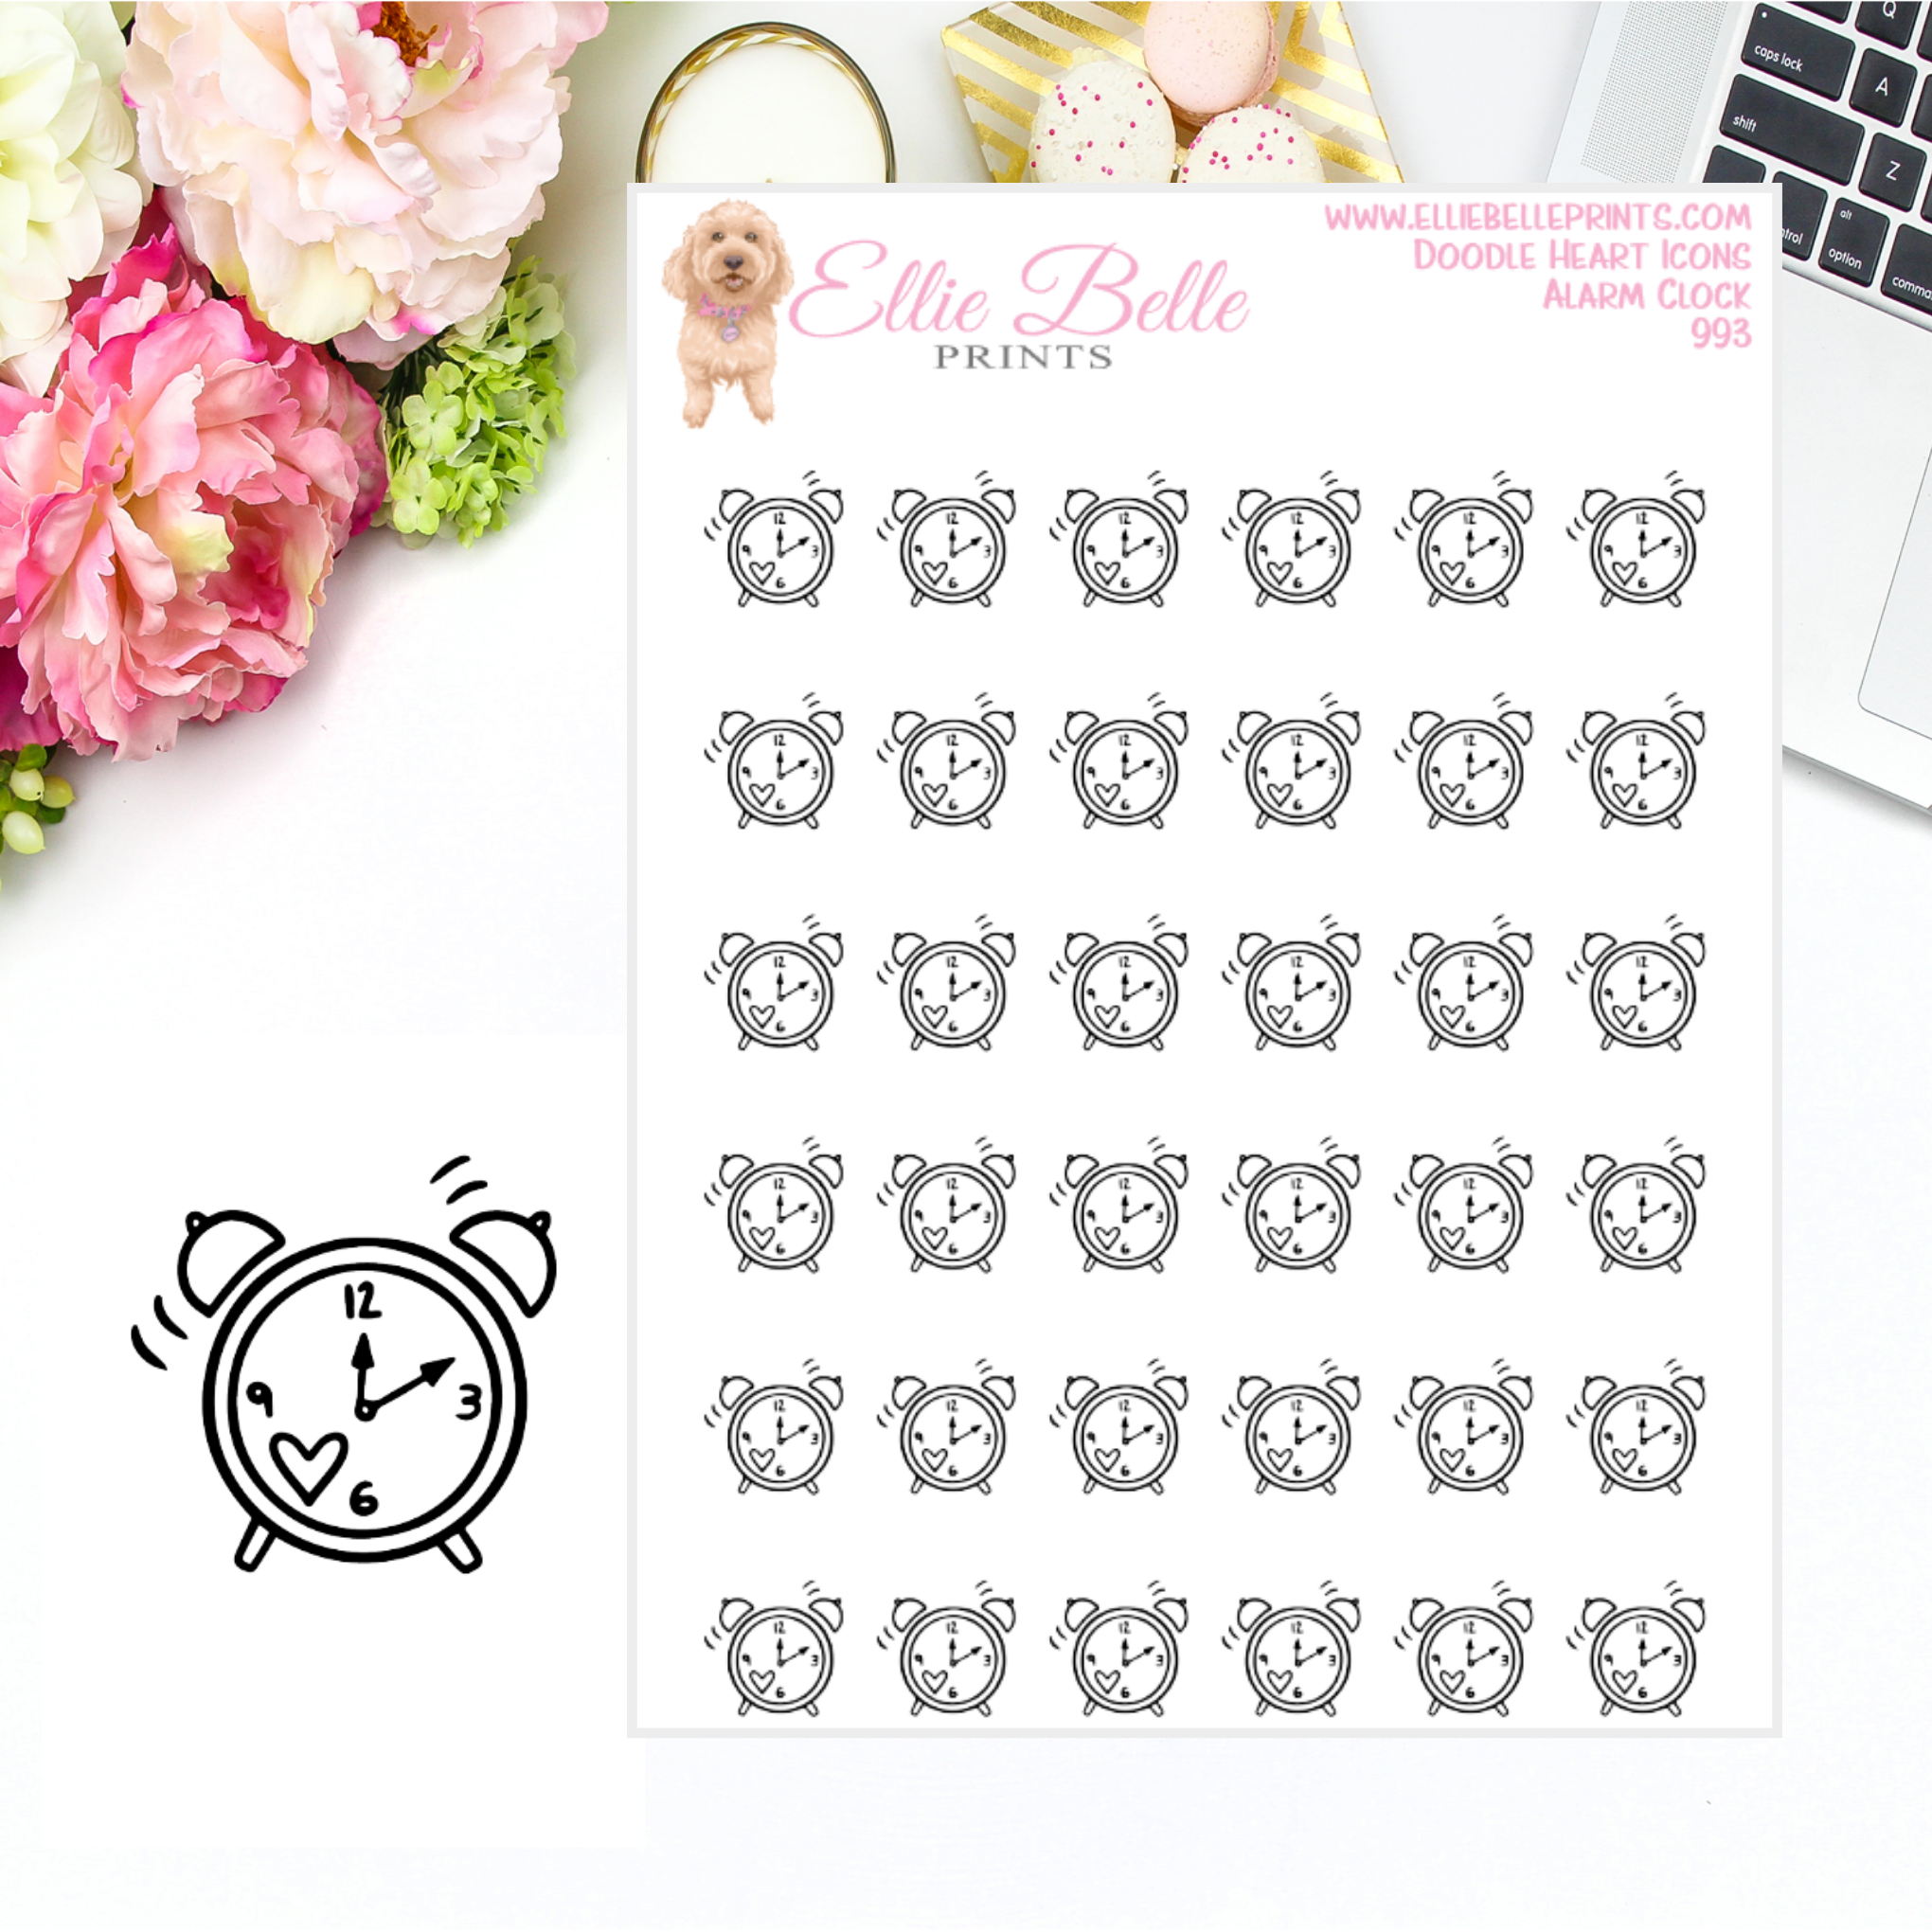 Alarm Clock Icons - Doodle Heart Icons